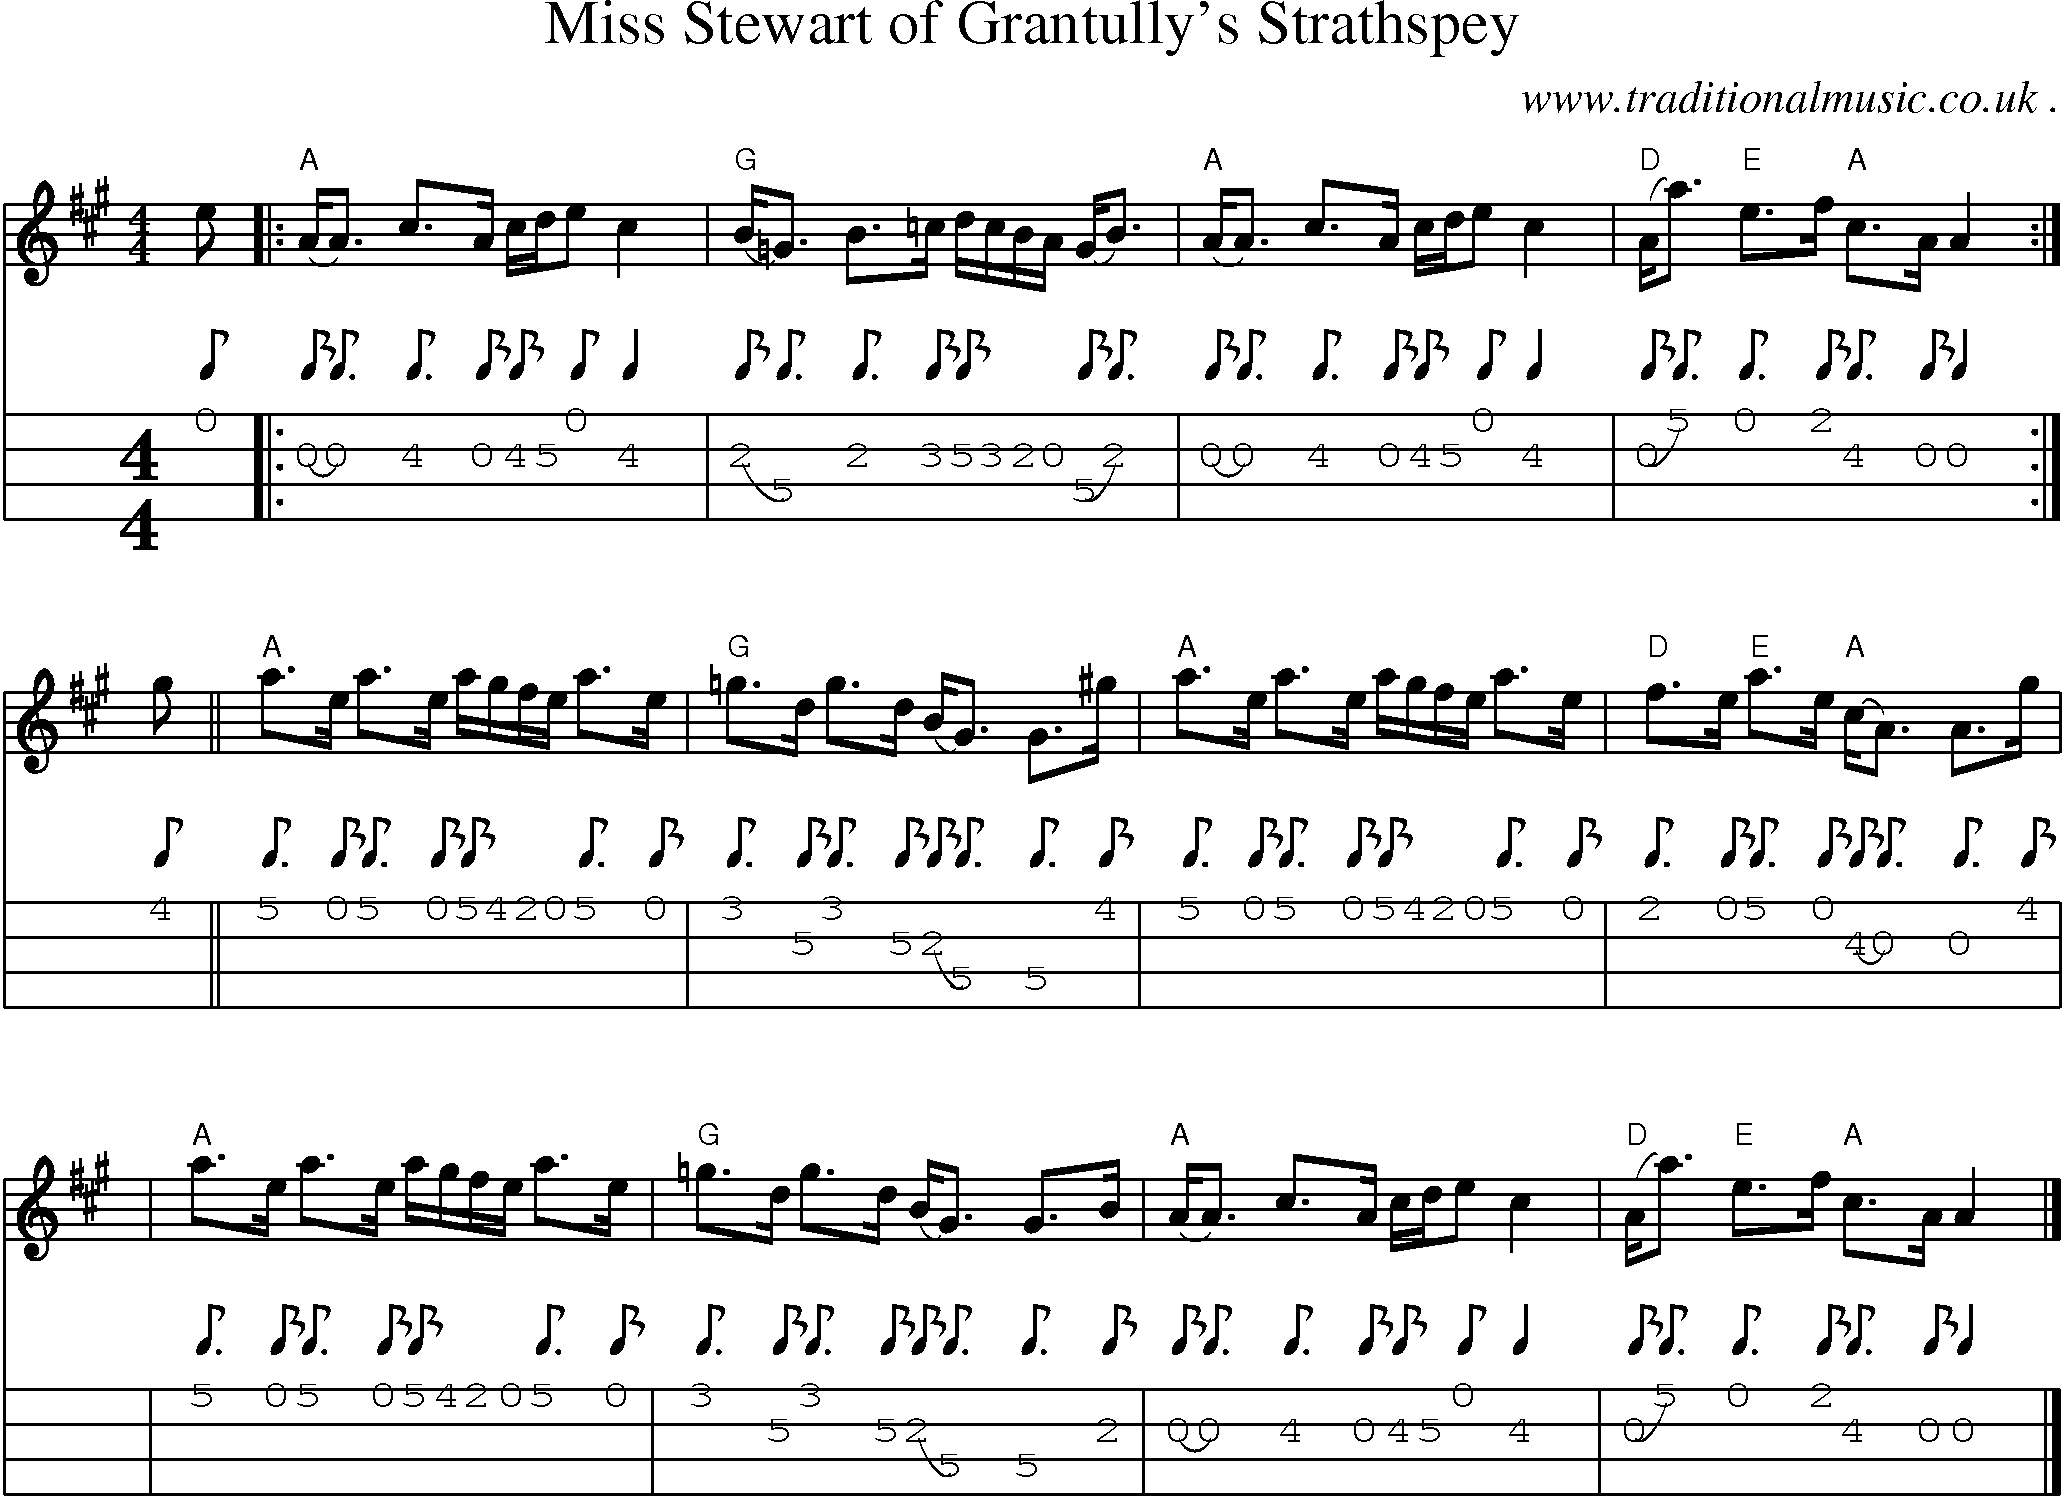 Sheet-music  score, Chords and Mandolin Tabs for Miss Stewart Of Grantullys Strathspey